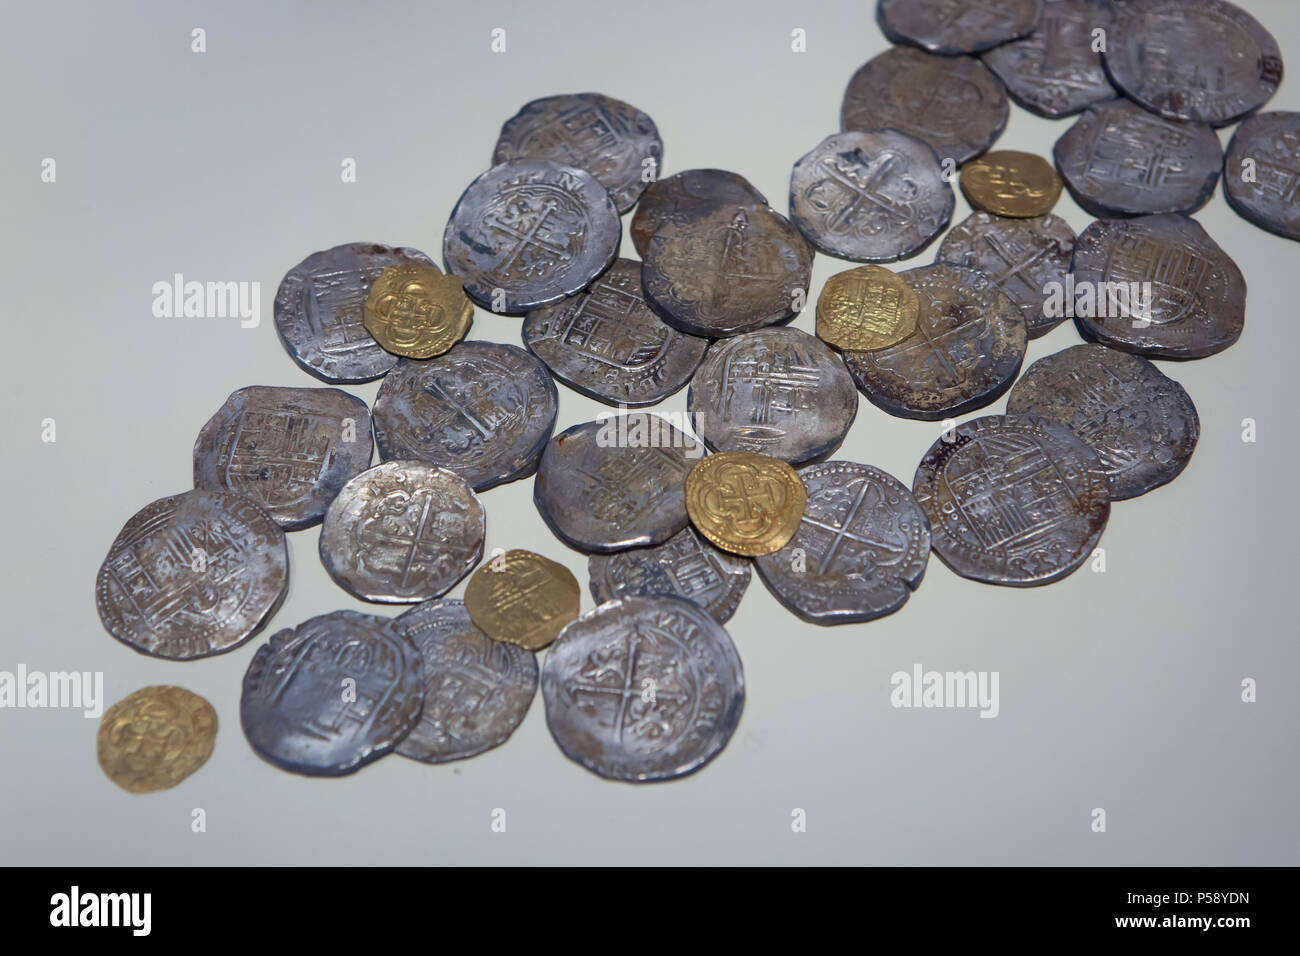 Spanish silver and golden coins from the Gazteluberri Hoard (Tesoro de Gazteluberri) on display in the National Archaeological Museum (Museo Arqueológico Nacional) in Madrid, Spain. Hoard of 52 silver and gold coins of Queen Joanna, King Charles V and King Philip II issued in 1537-1598 was found in Segura in Guipúzcoa Province, Spain. Stock Photo